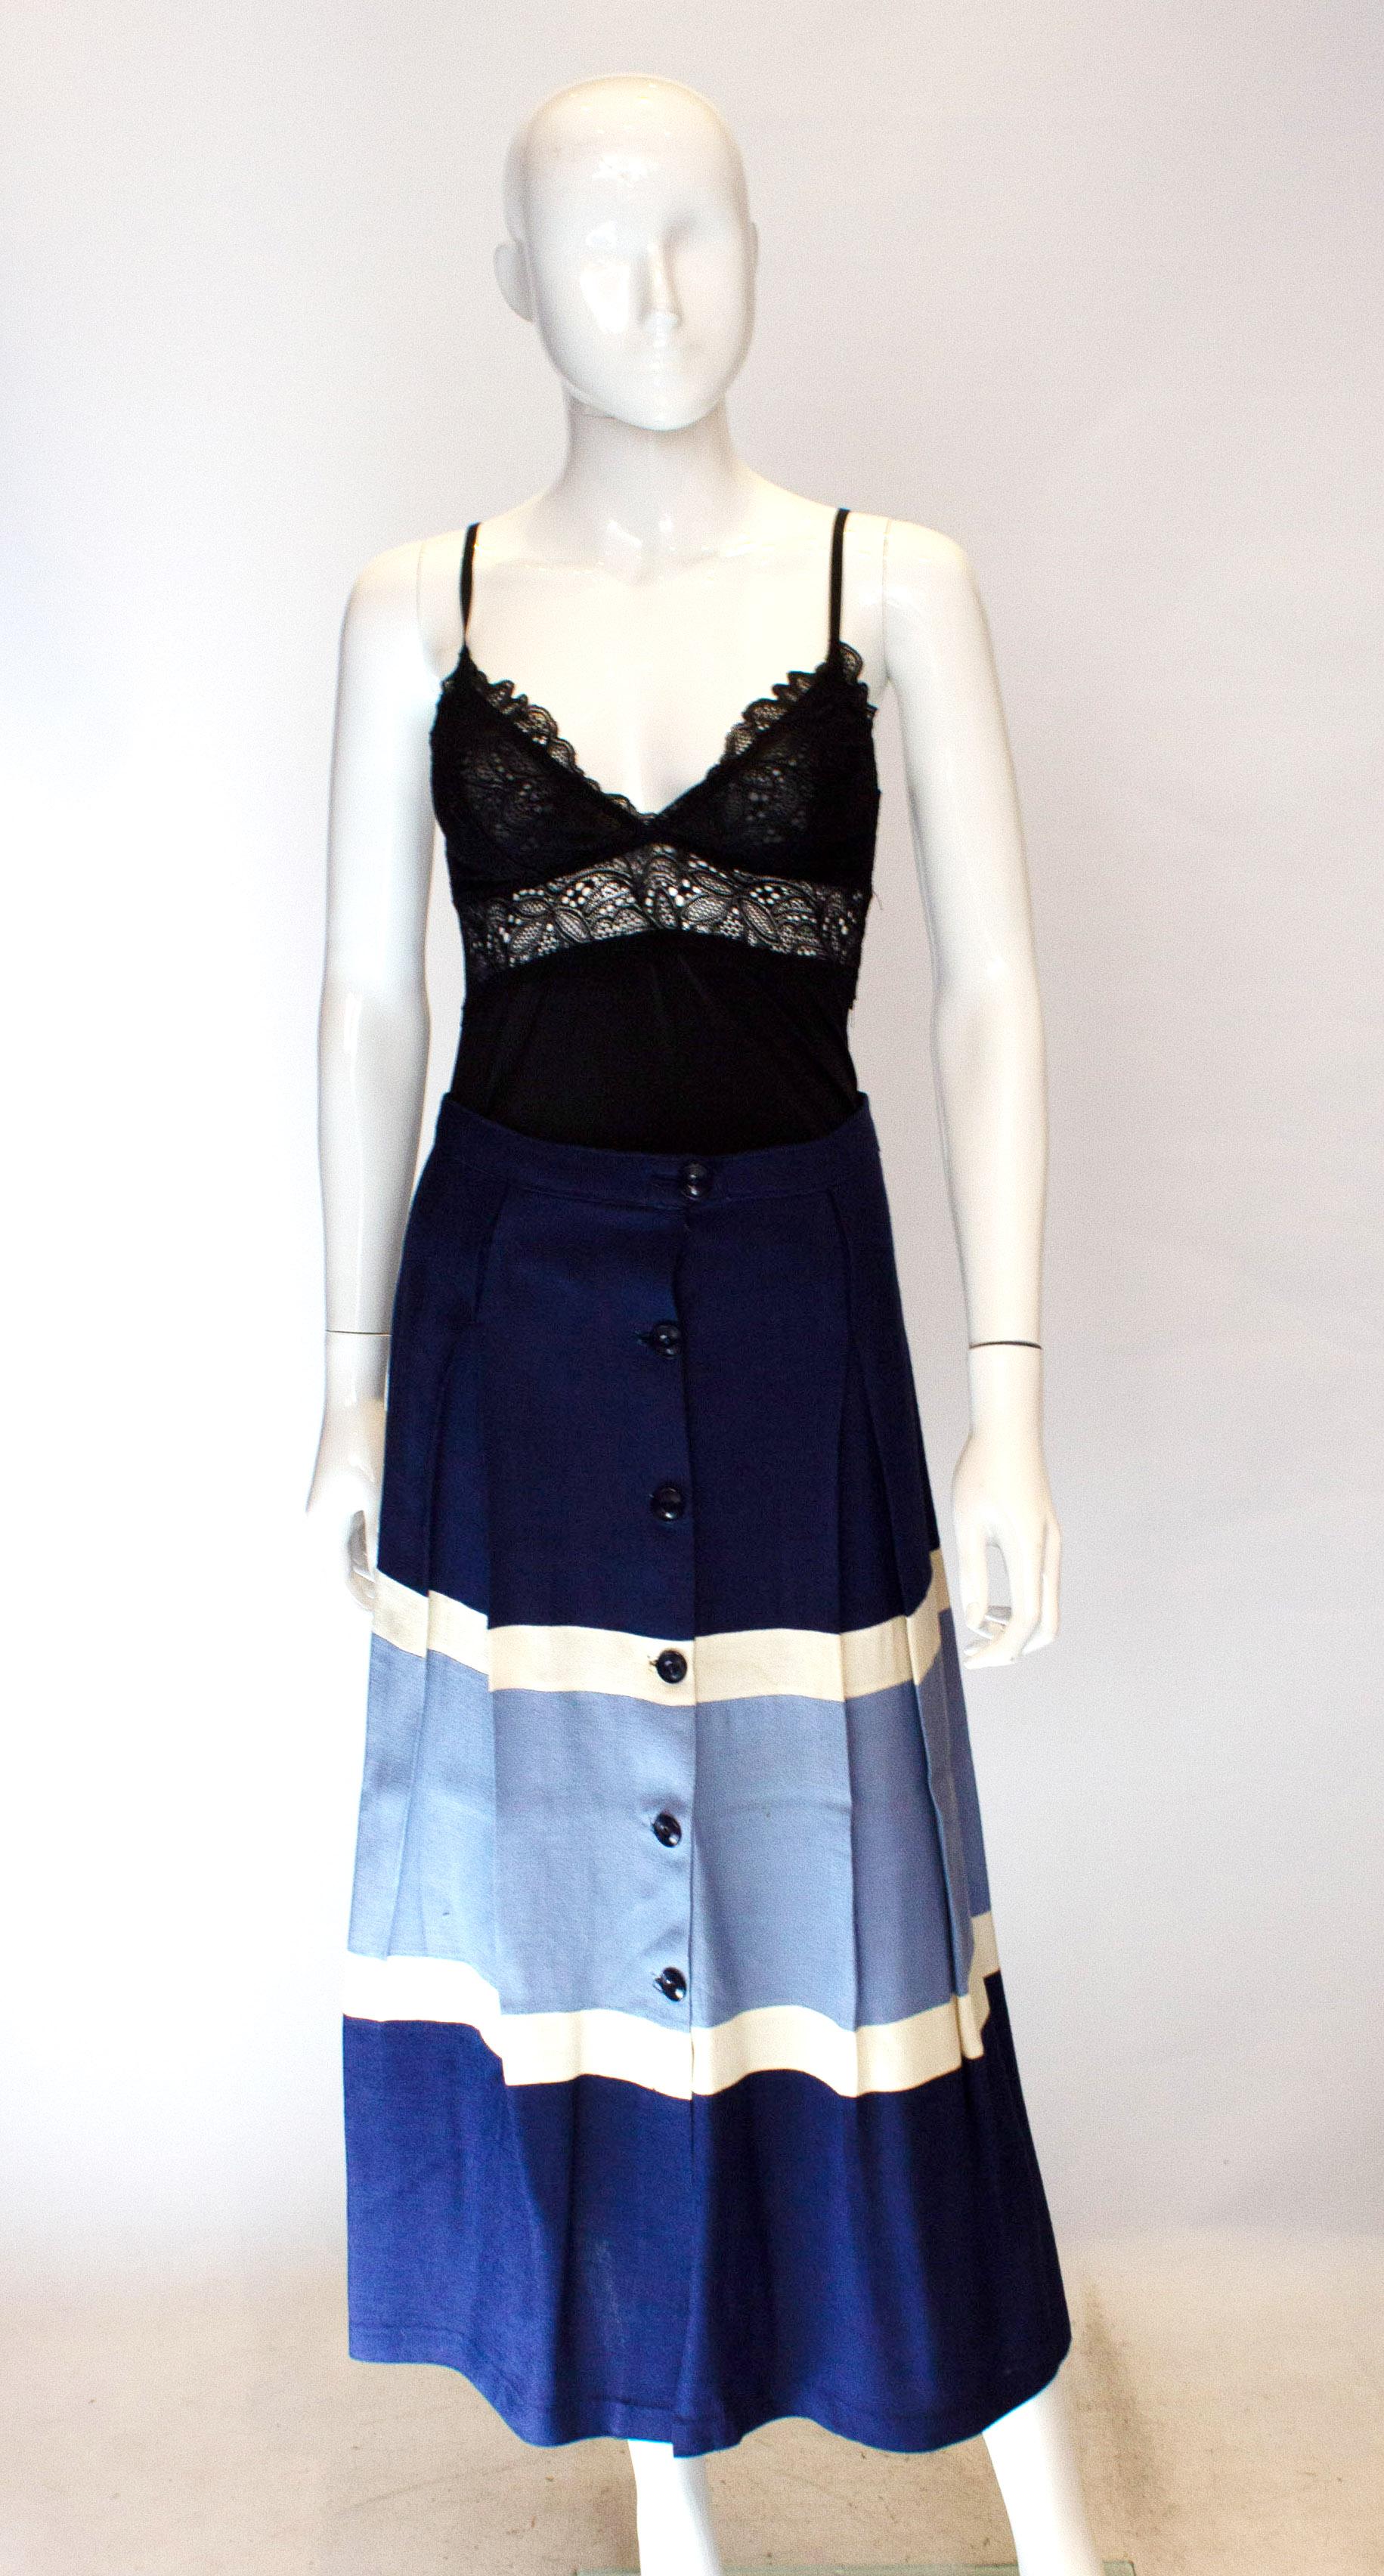 A fun vintage skirt for Summer. The skirt is in blue and white horizontal bands of colour. It has pleats that start below the waistband and so produce a flattering line. The skirt is unlined, and has a side button opening.
Marked size 44, waist